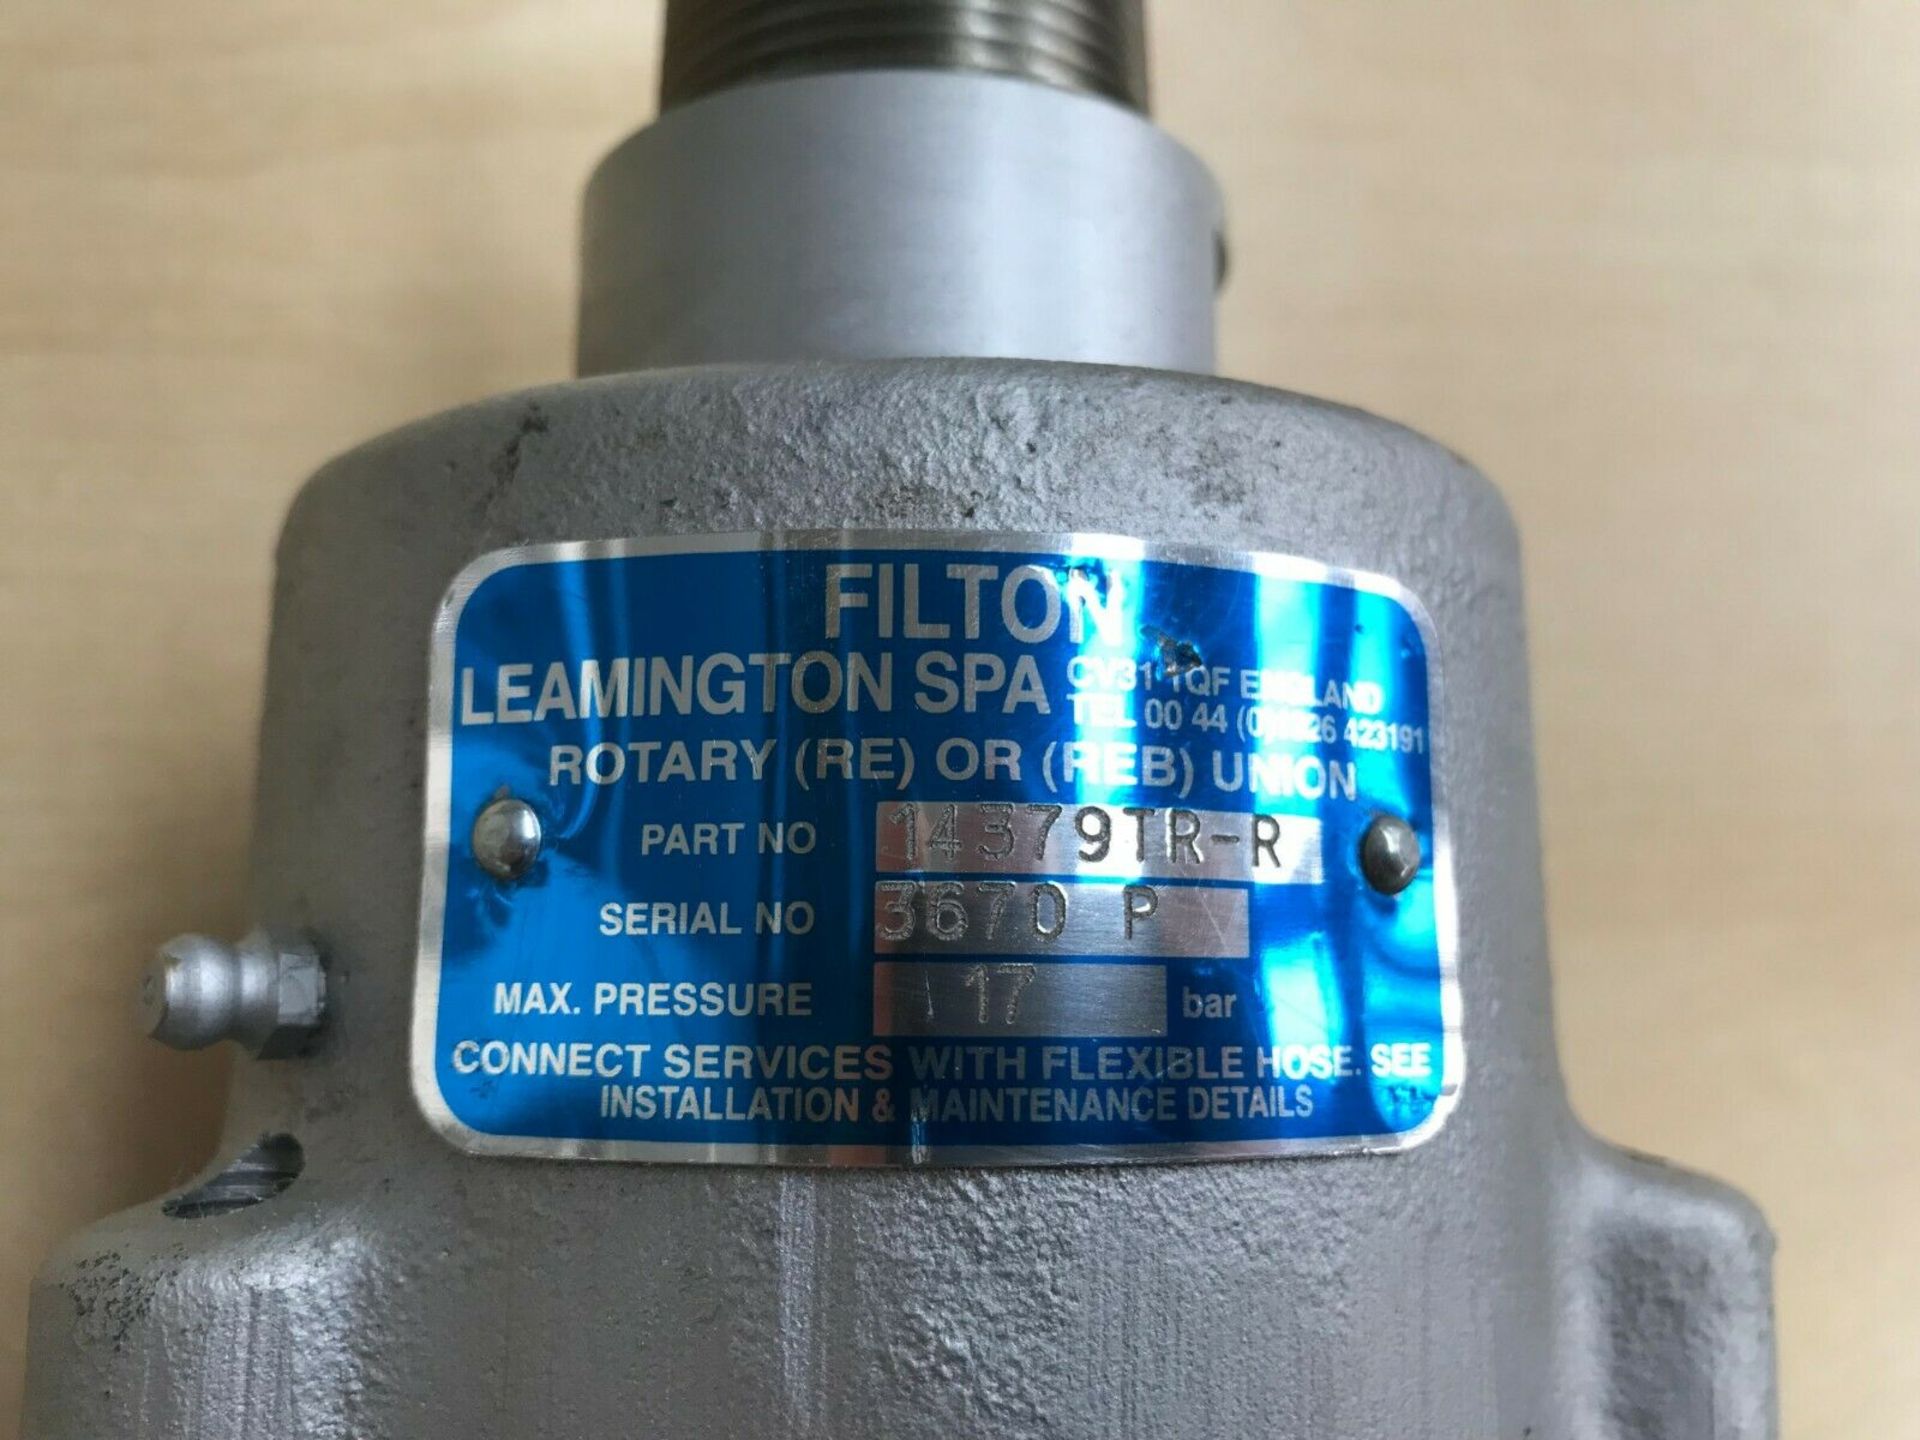 Filton 17 bar Swivel Joint or Rotary Union - Image 2 of 2